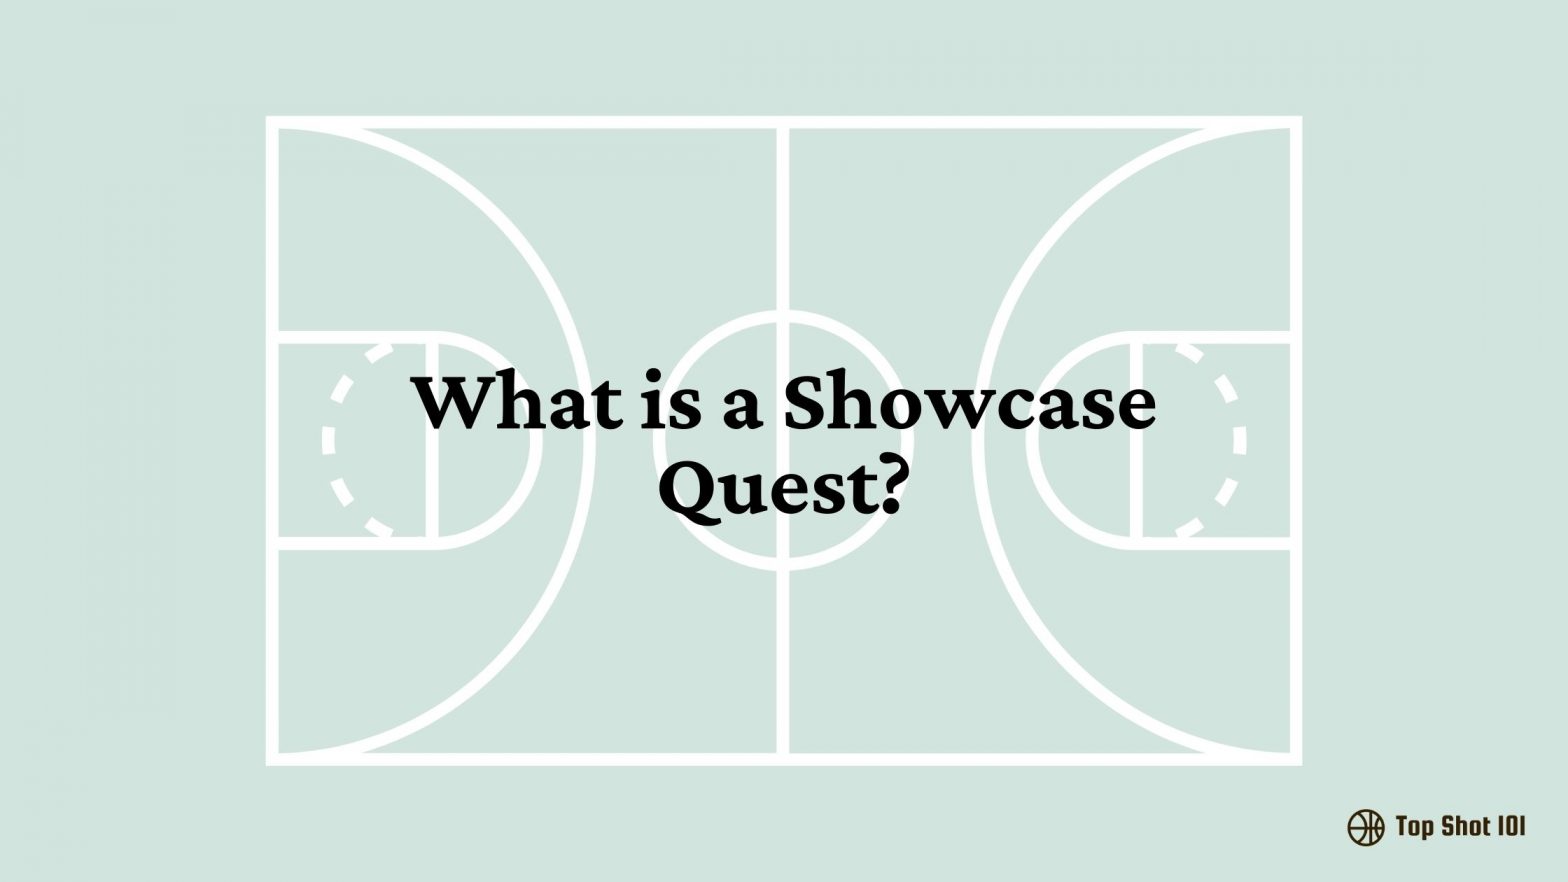 What is a Showcase Quest?